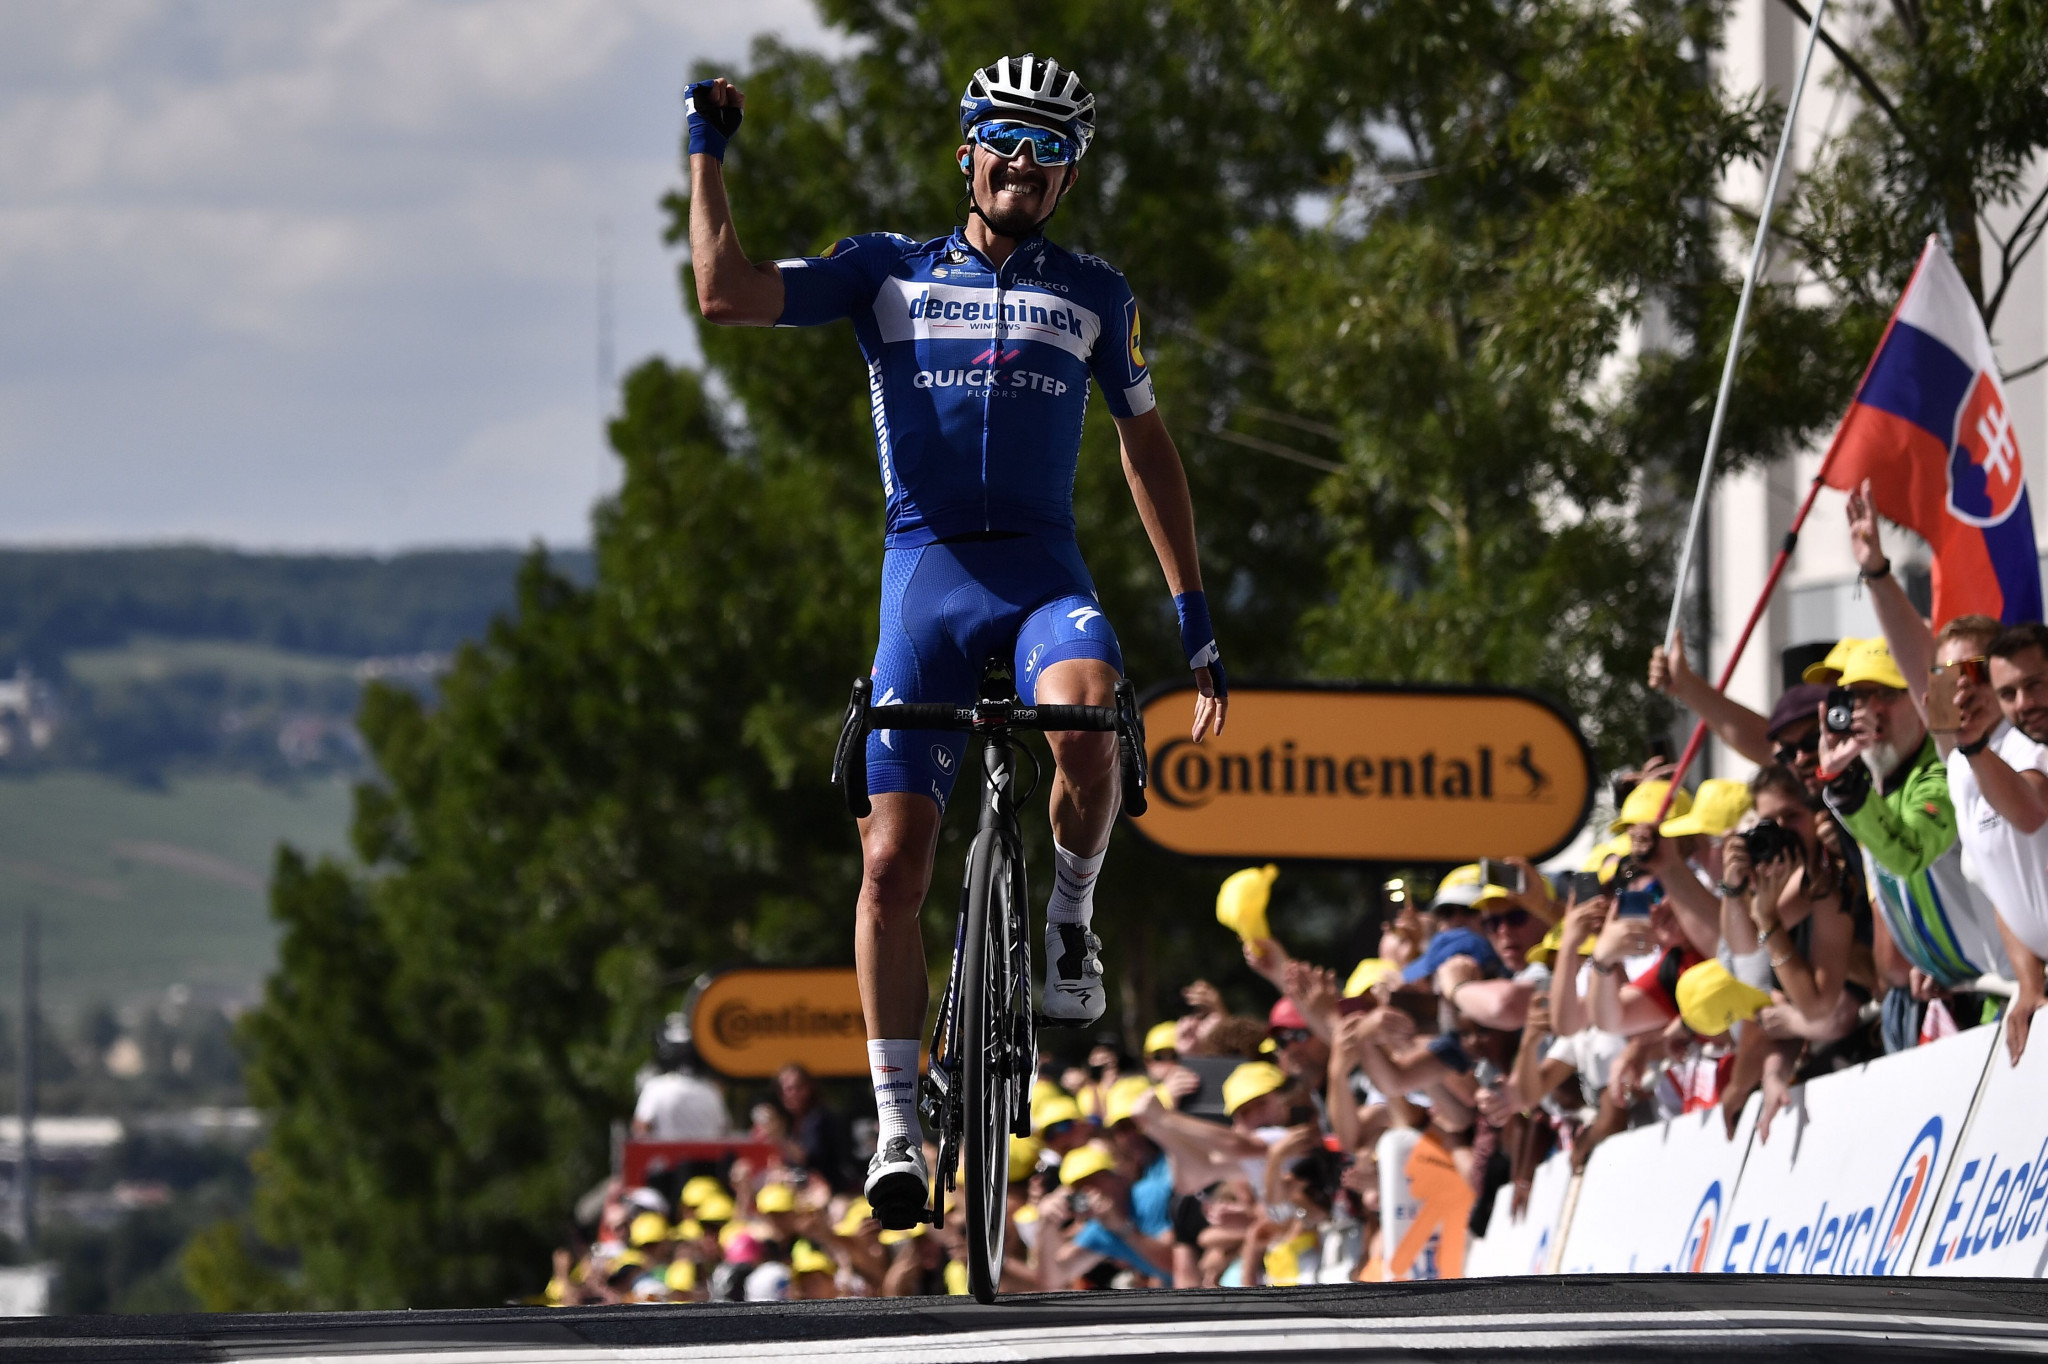 World number one Julian Alaphilippe powered to victory with a strong attack on stage three of the Tour de France ©Getty Images